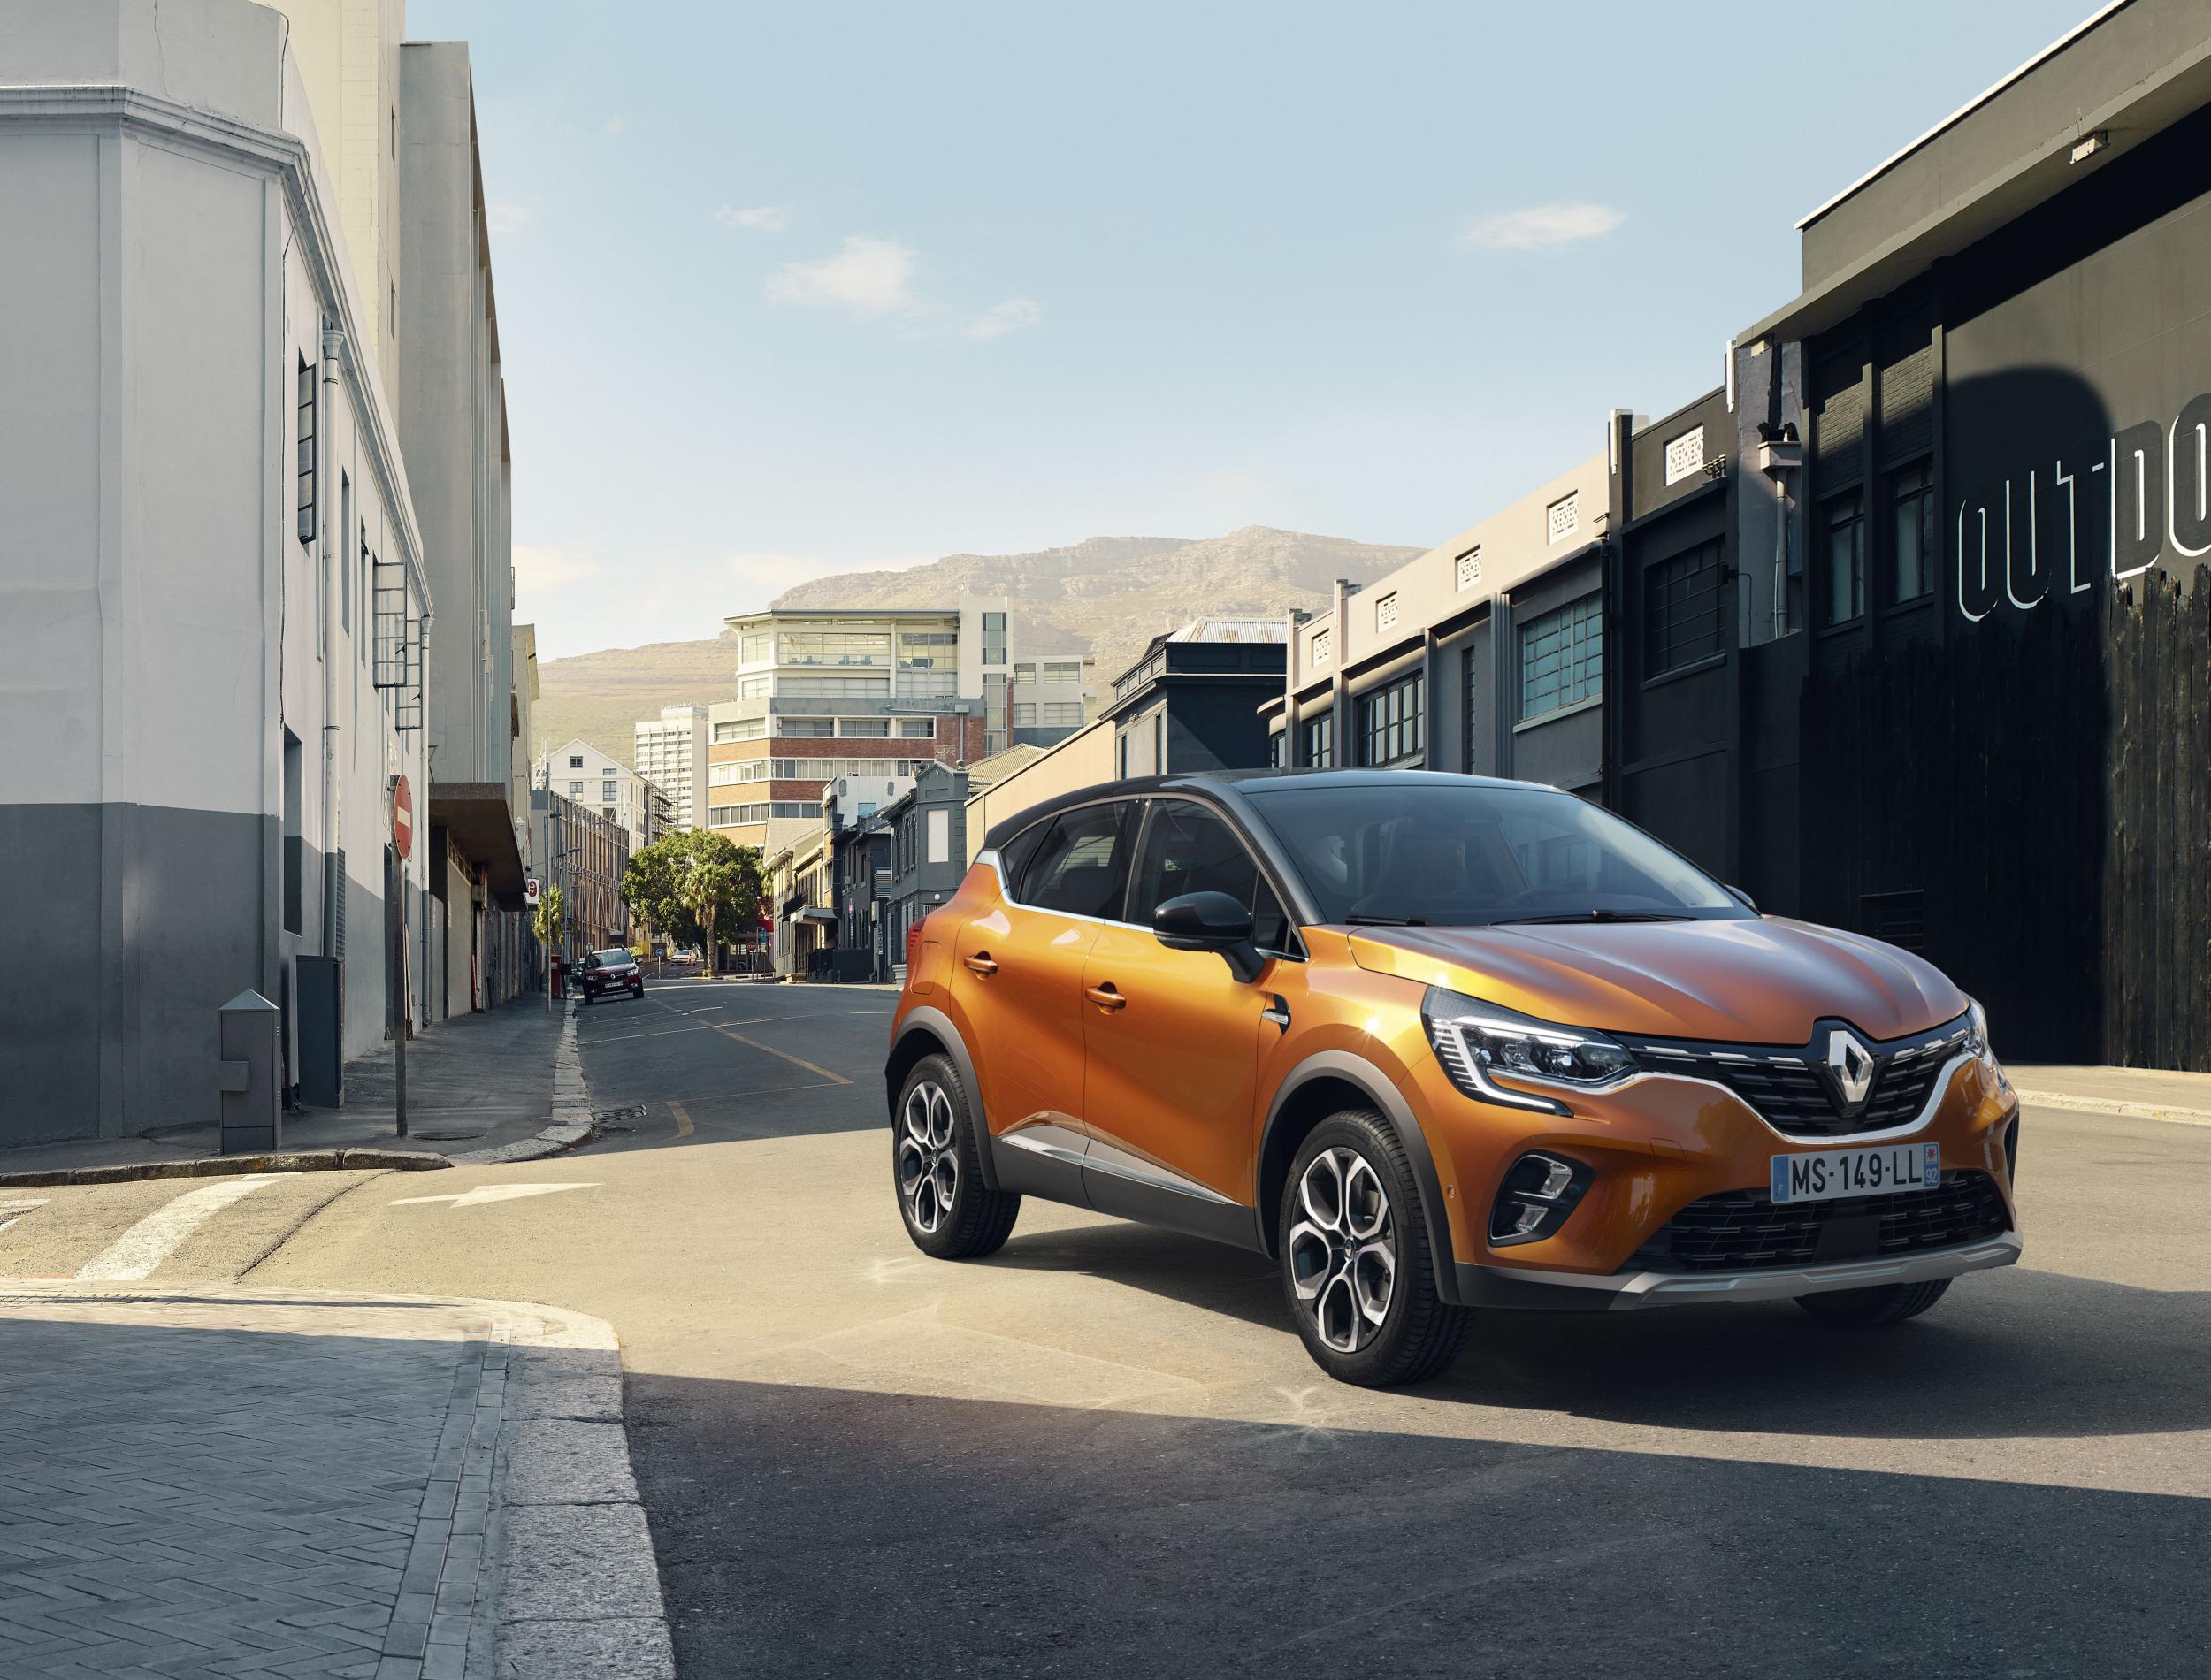 The Captur is a rather less wacky looking version of the familiar Juke, and just as satisfying to drive and own